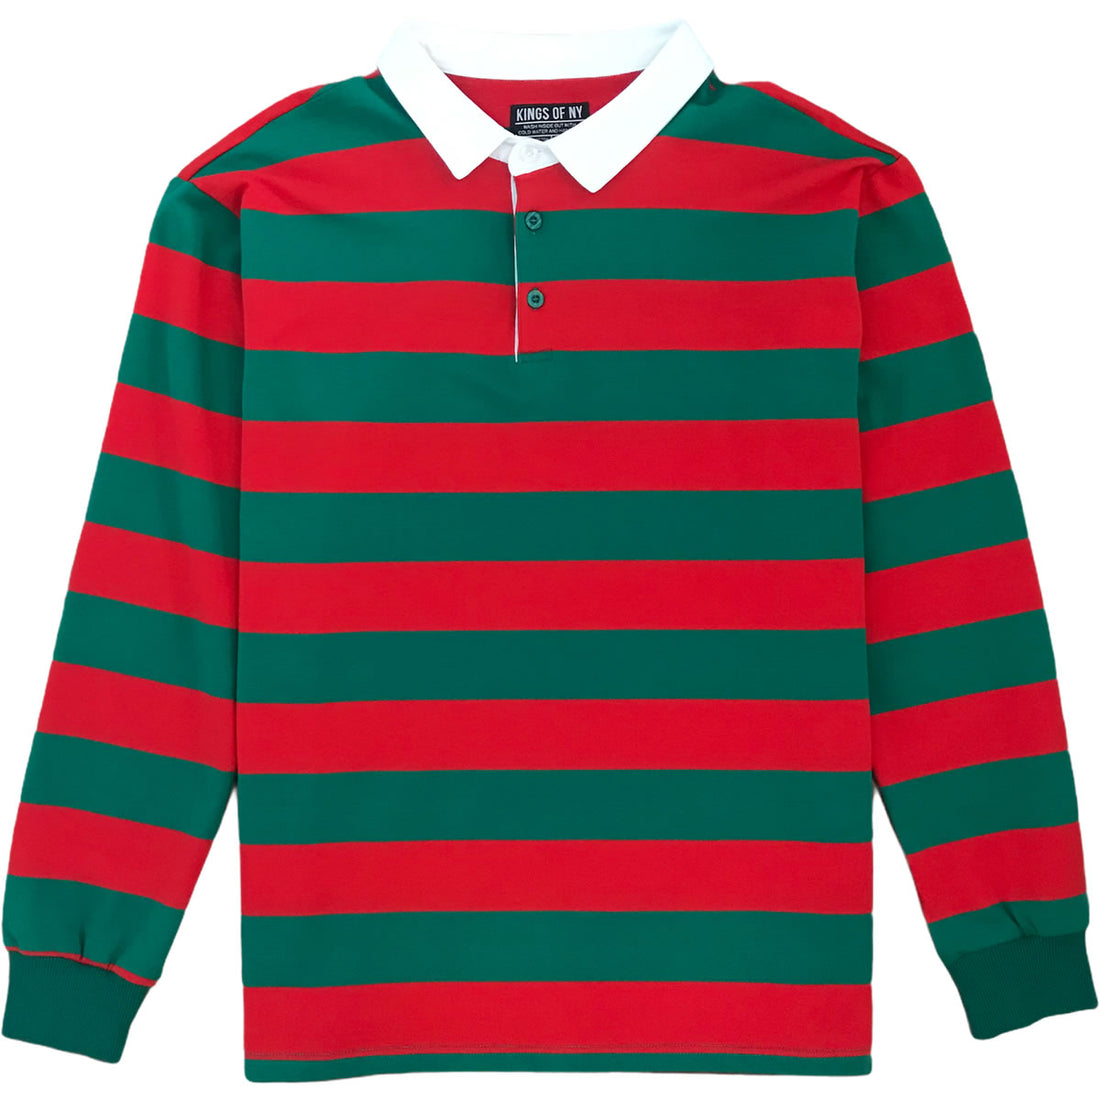 And Red Striped Mens Long Sleeve Rugby Shirt – KINGS